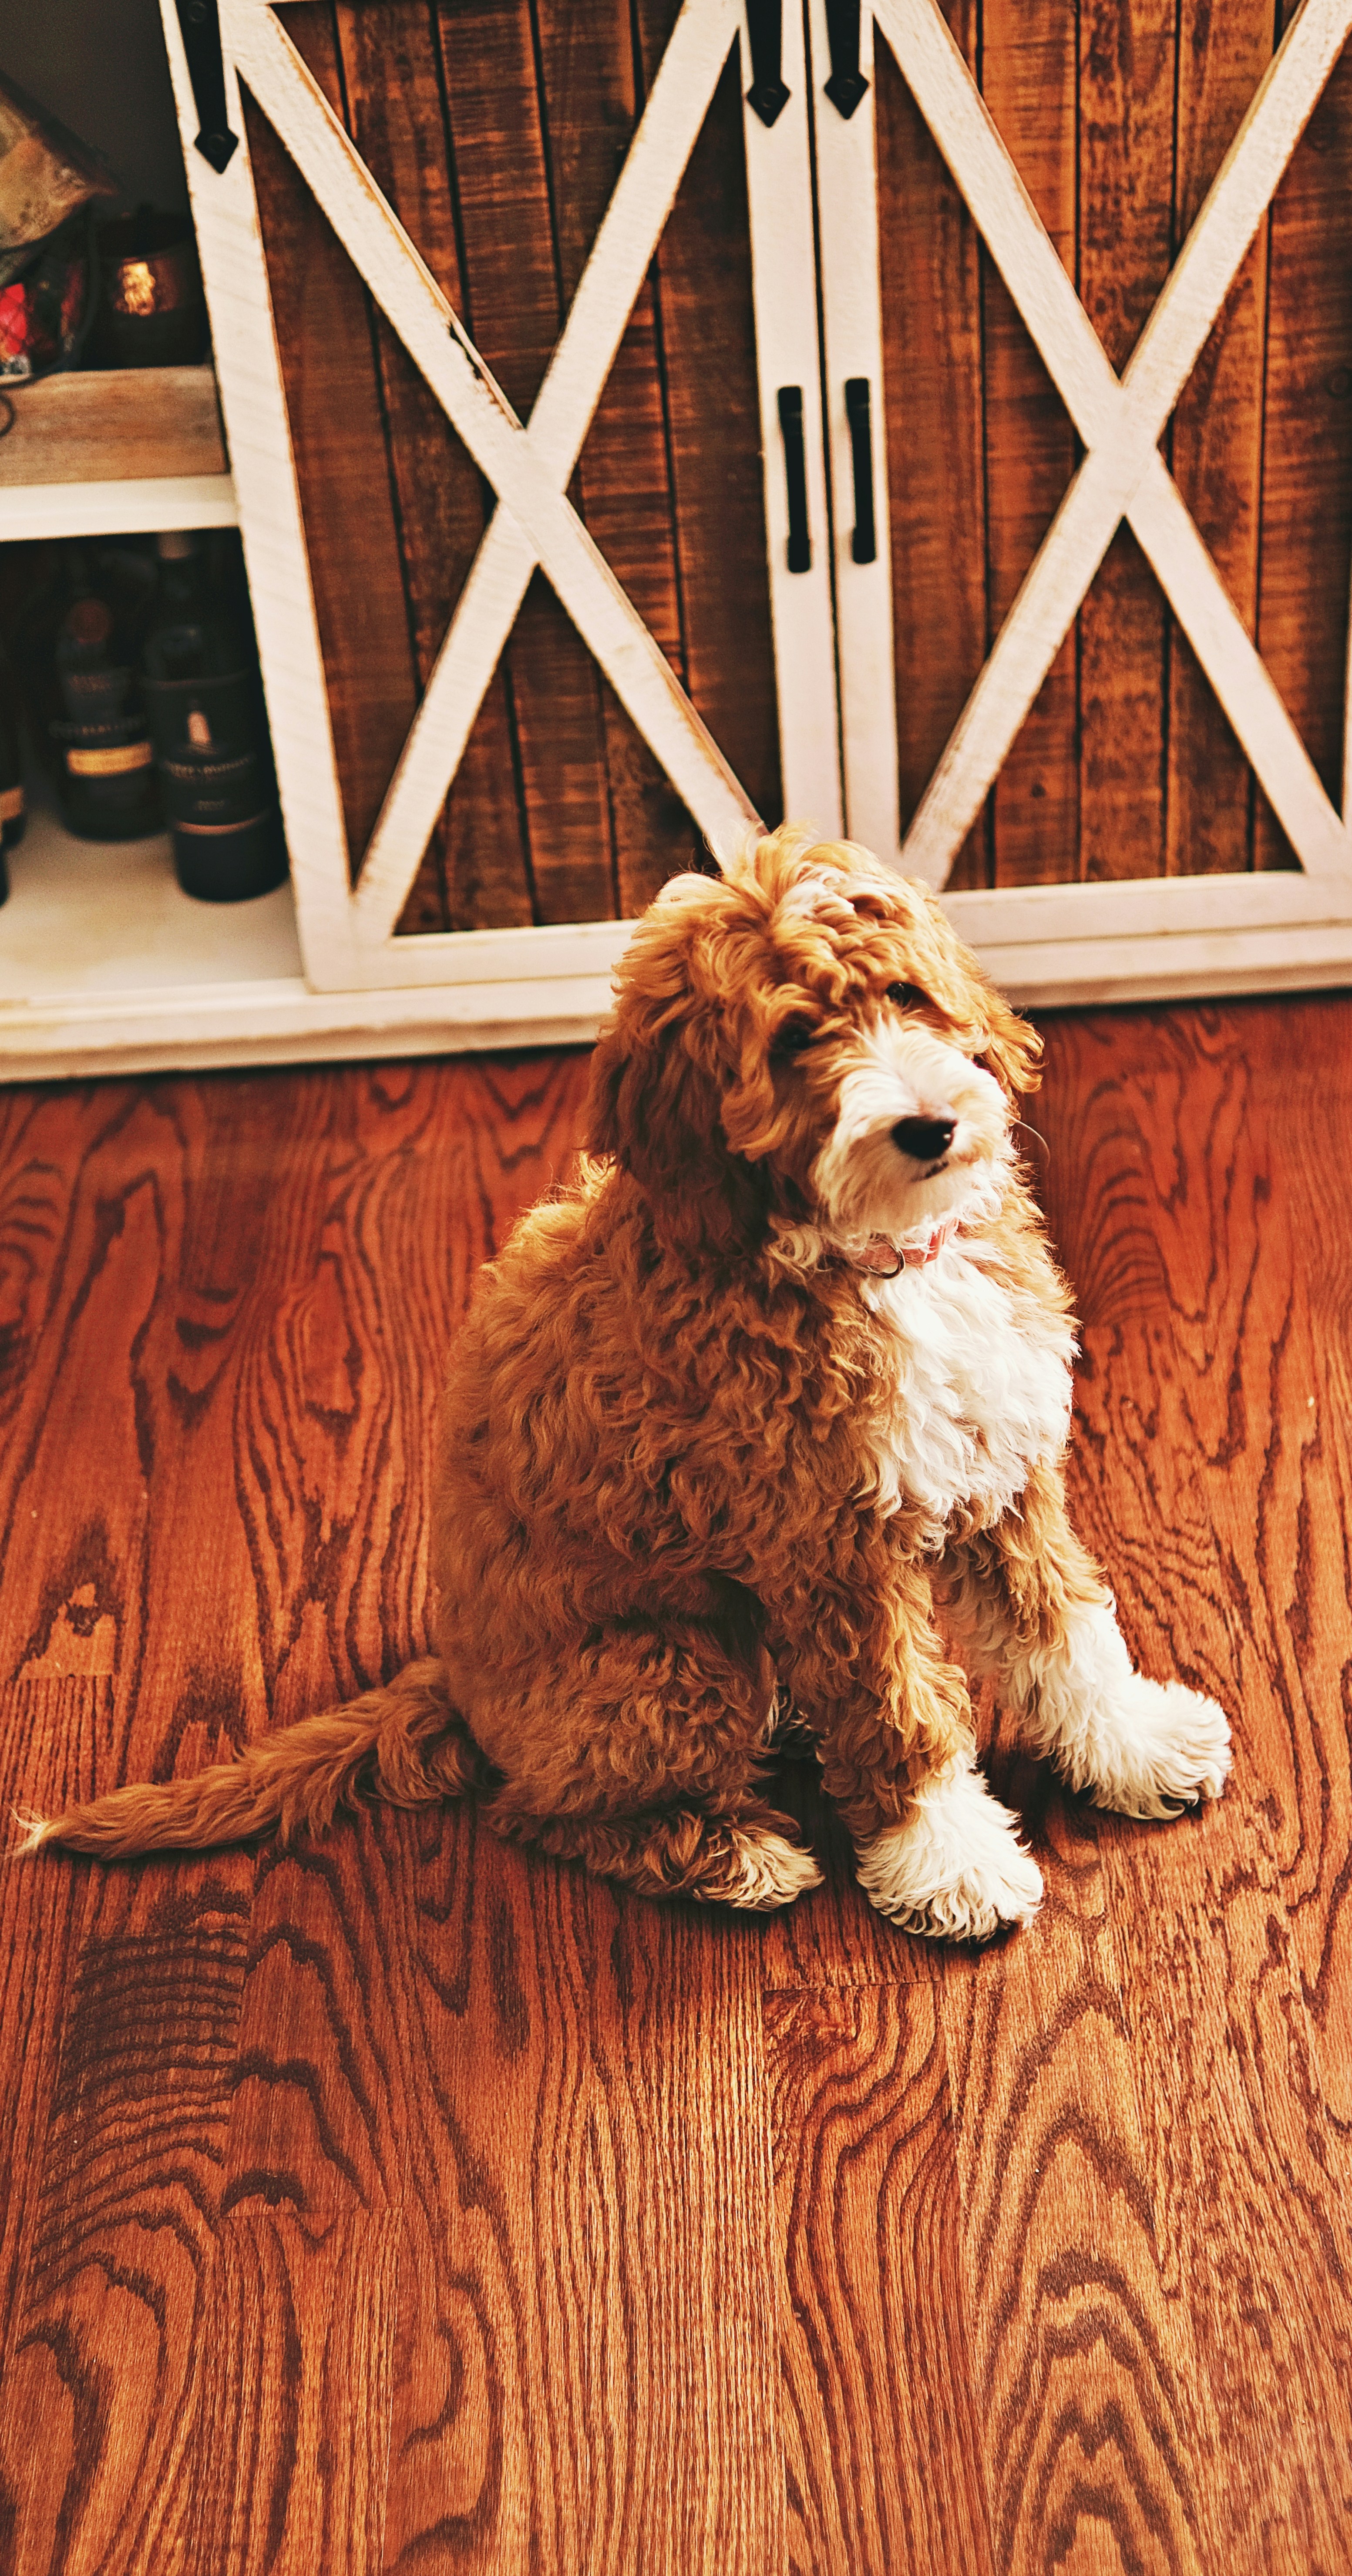 A brown and white goldendoodle sitting curiously.